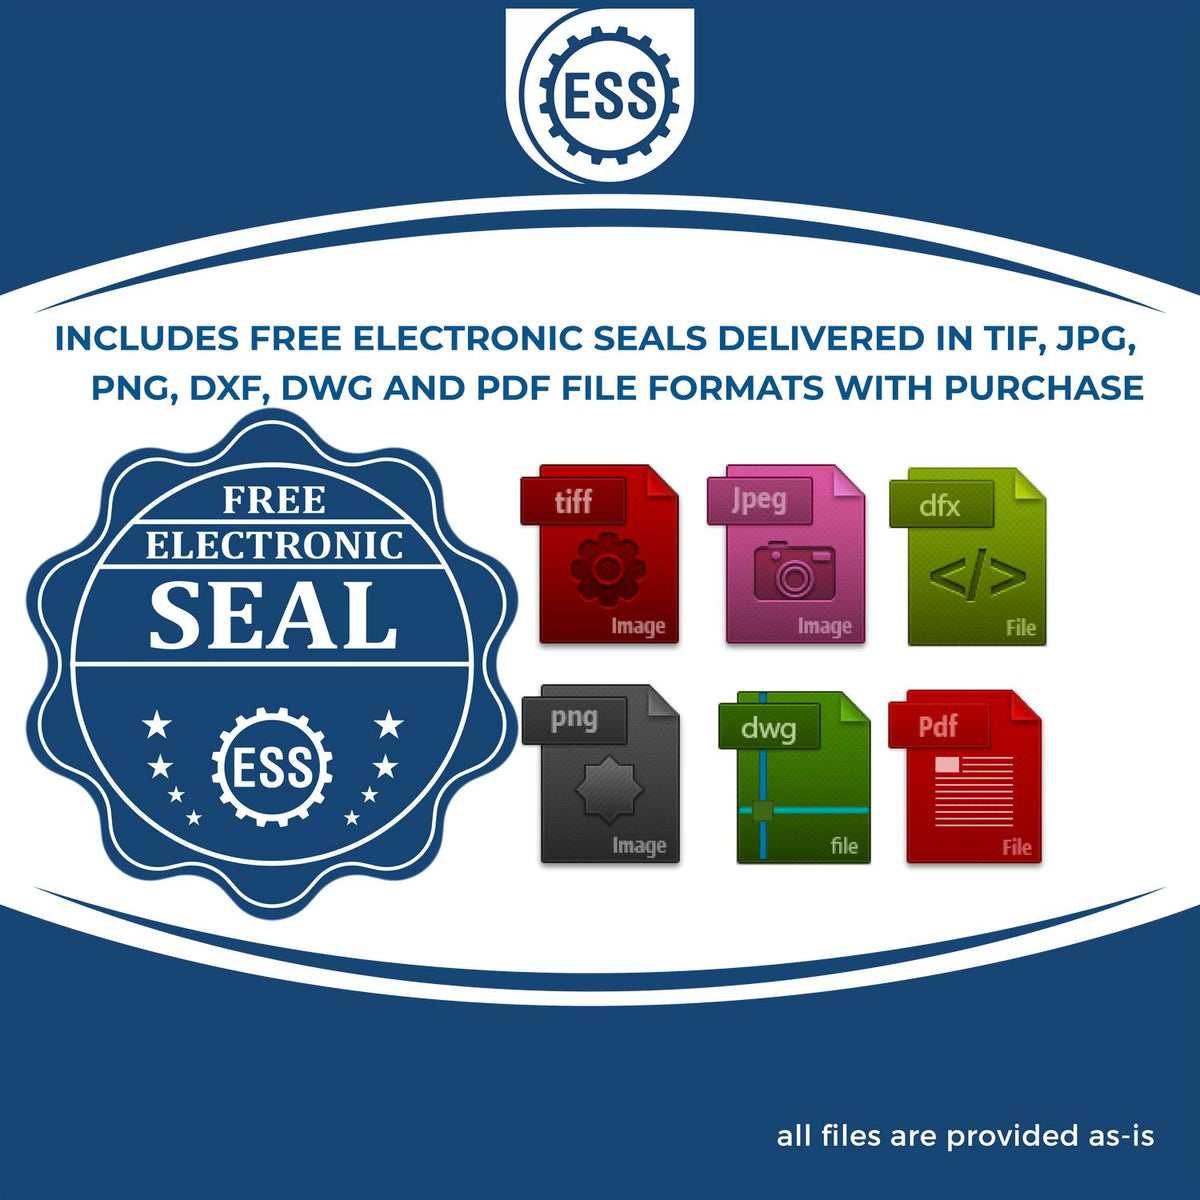 An infographic for the free electronic seal for the Heavy Duty Cast Iron Nevada Engineer Seal Embosser illustrating the different file type icons such as DXF, DWG, TIF, JPG and PNG.